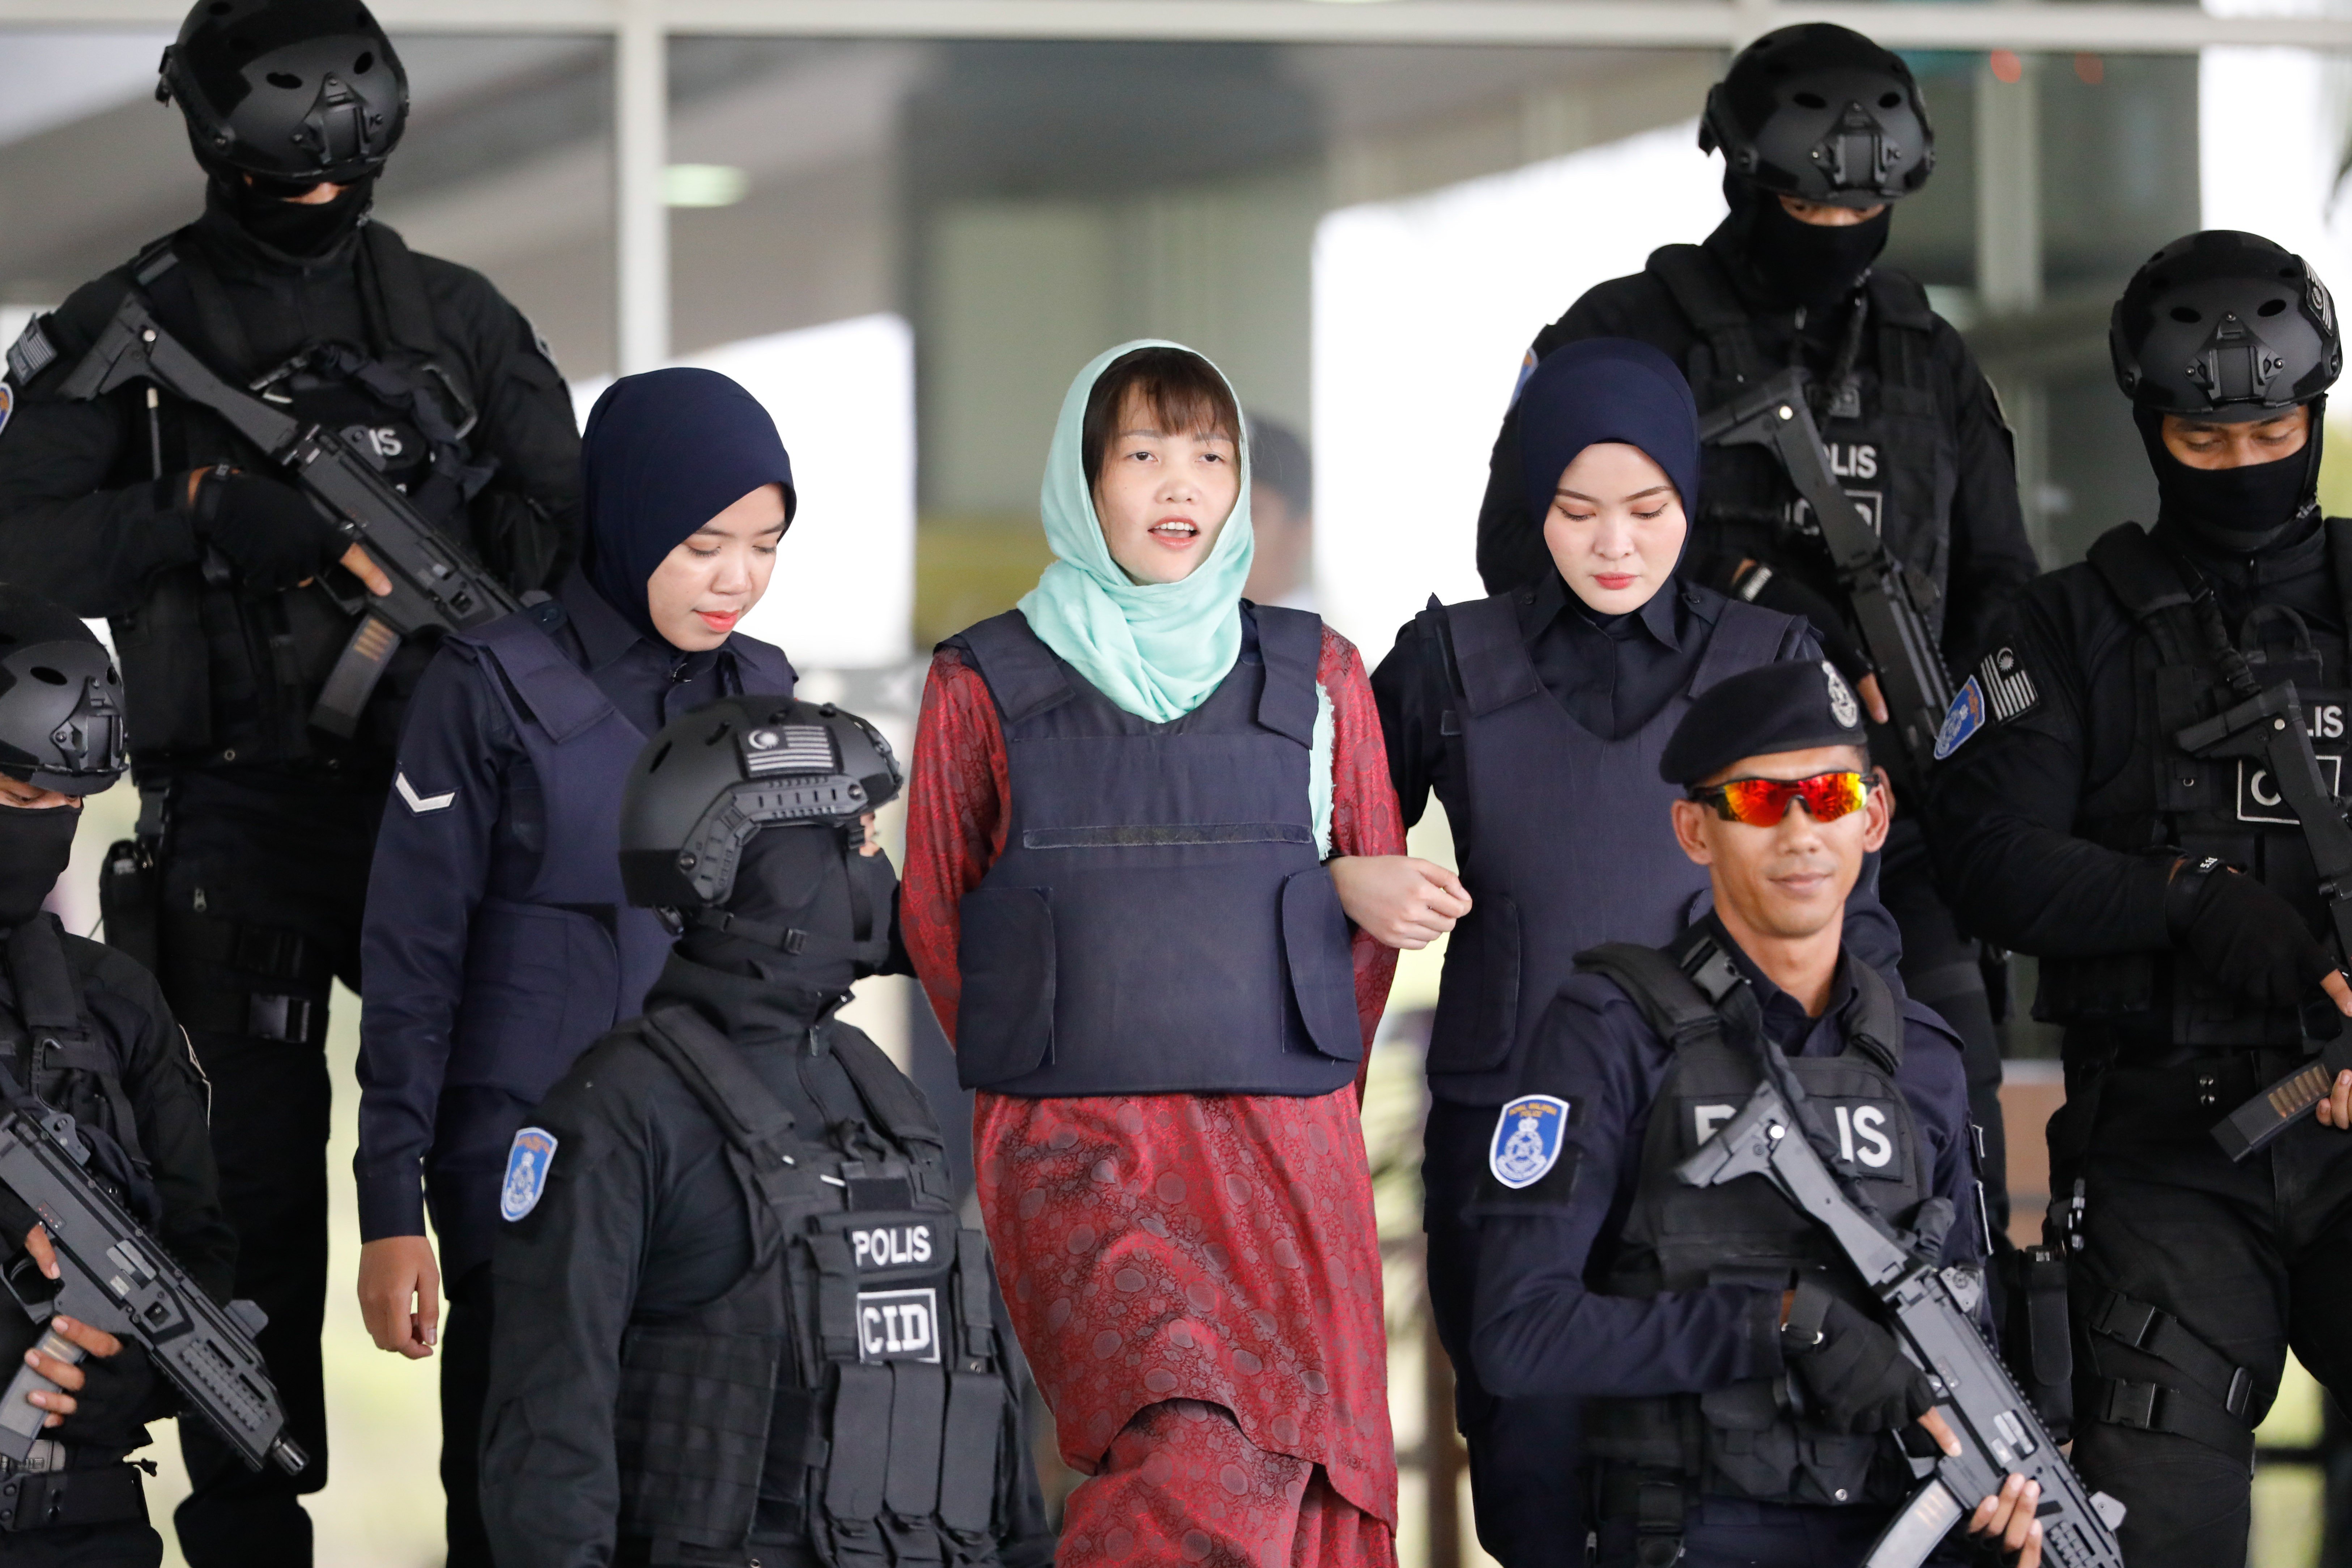 Doan Thi Huong being escorted by police from a court in Shah Alam, Malaysia on April 1, 2019. Photo: Xinhua